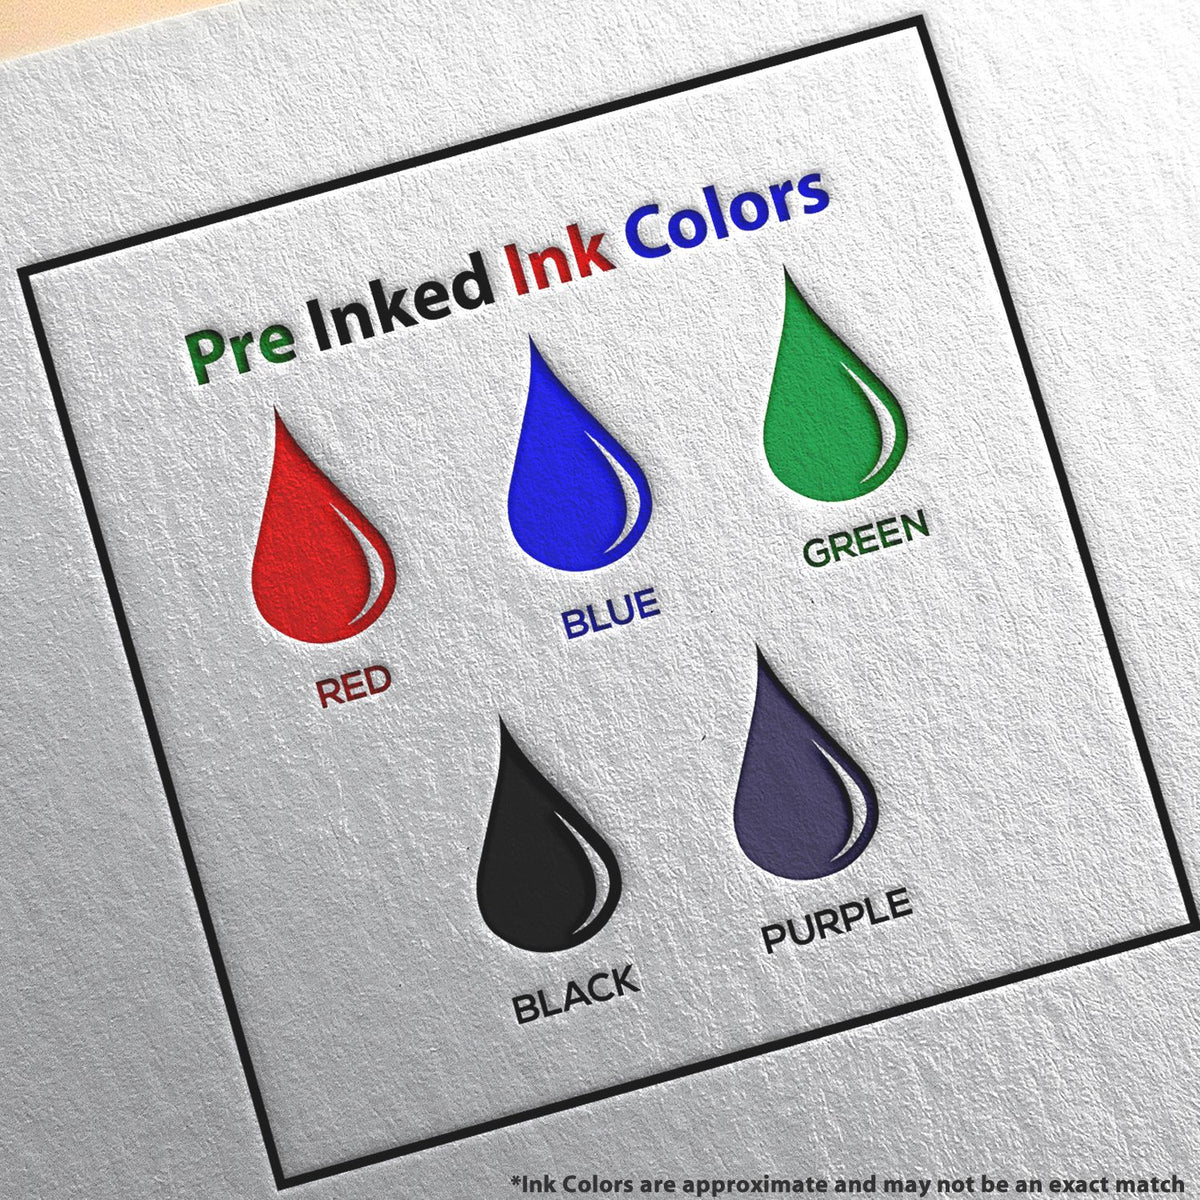 A picture showing the different ink colors or hues available for the Premium MaxLight Pre-Inked Nebraska Geology Stamp